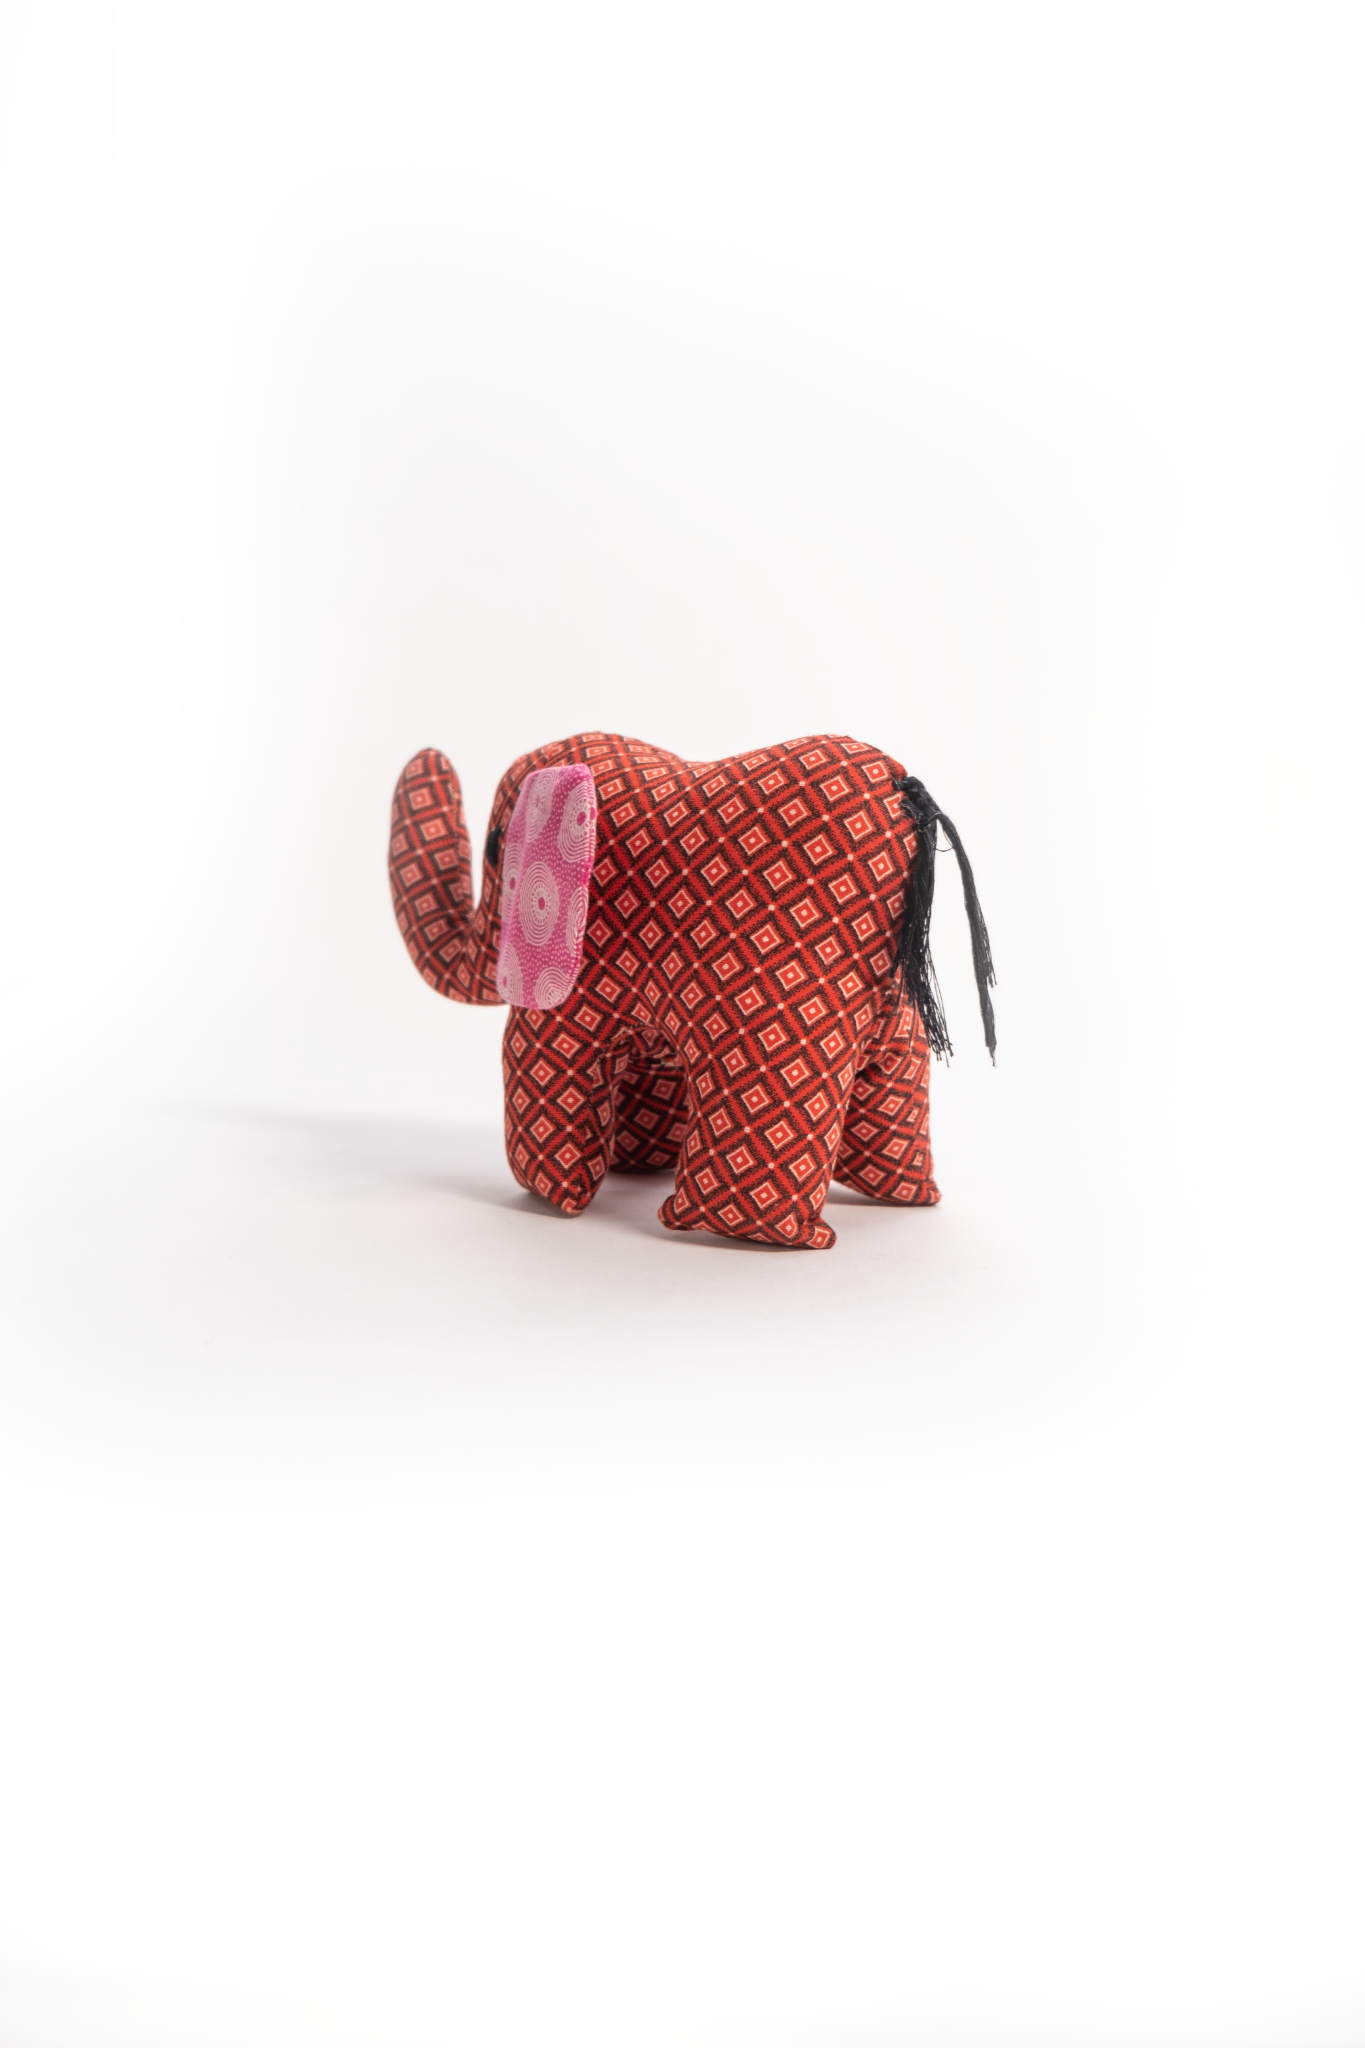 African Cloth Elephant Soft Toy - Small